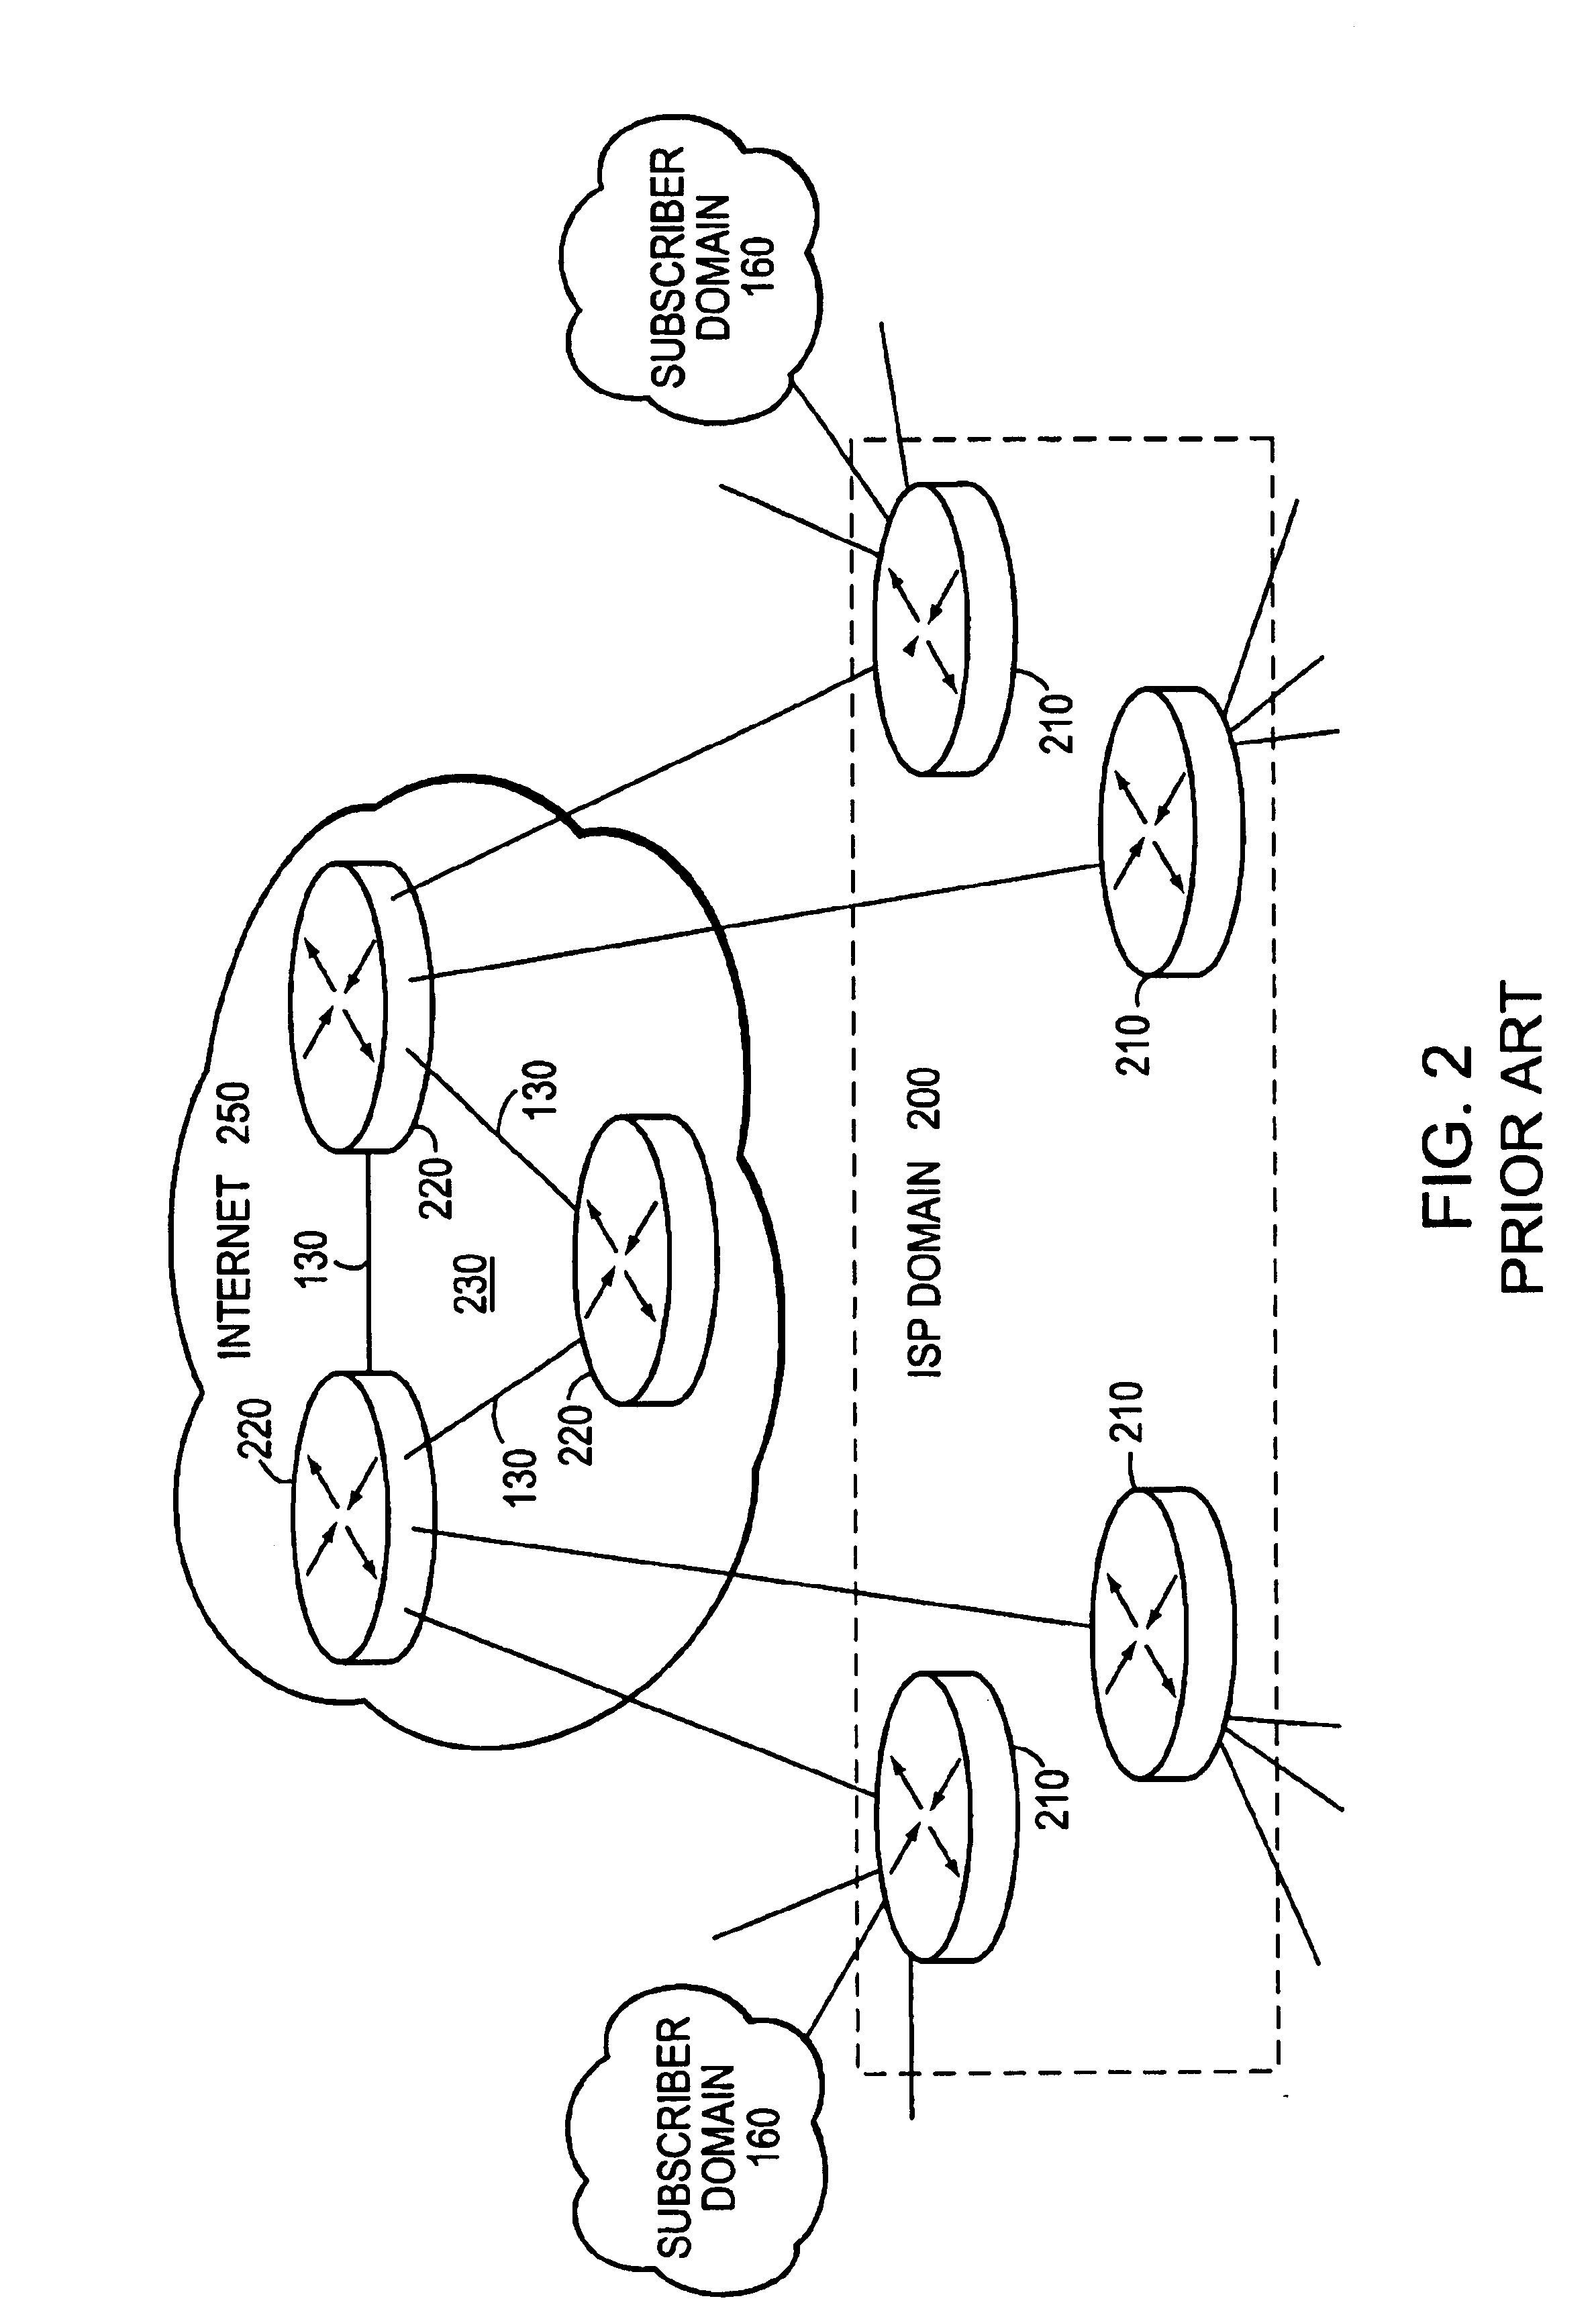 Data plane restart without state change in a control plane of an intermediate network node